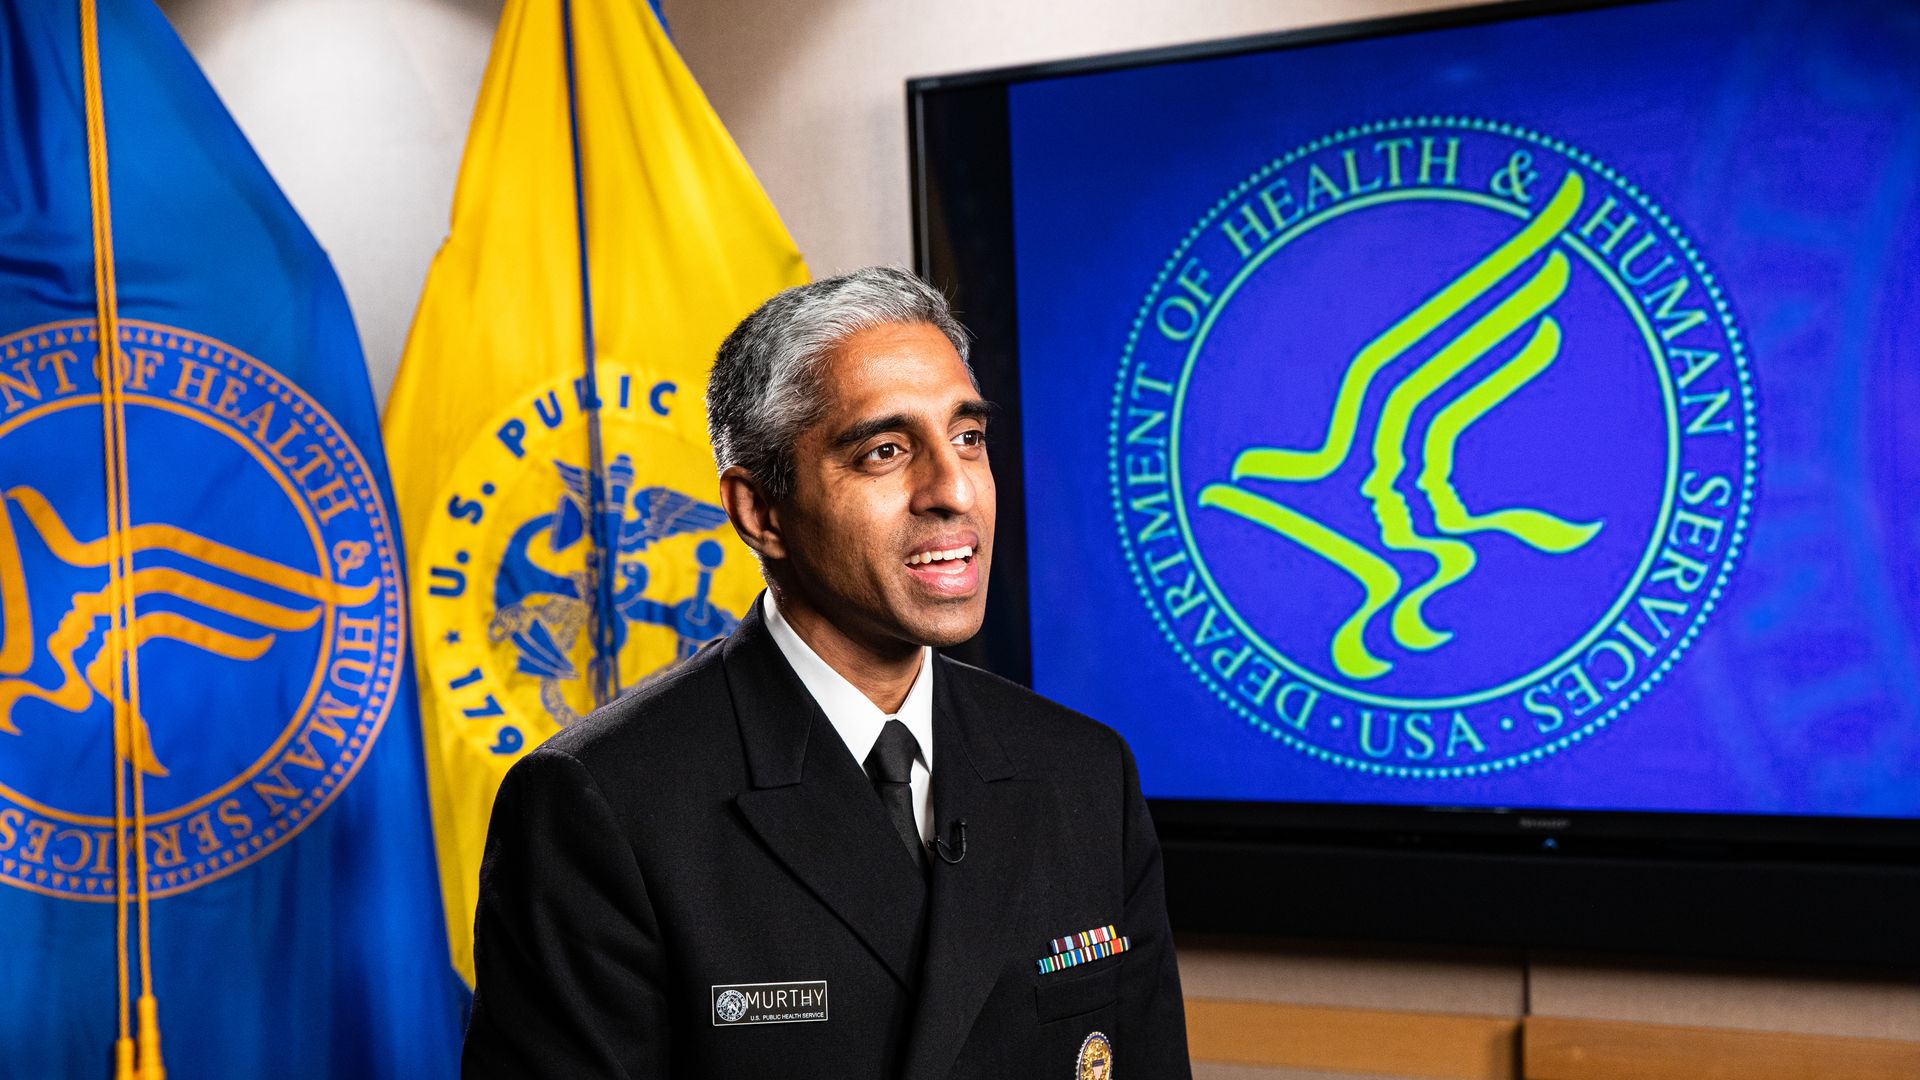 A photo of U.S. Surgeon General Vivek Murthy in front of the HHS logo.